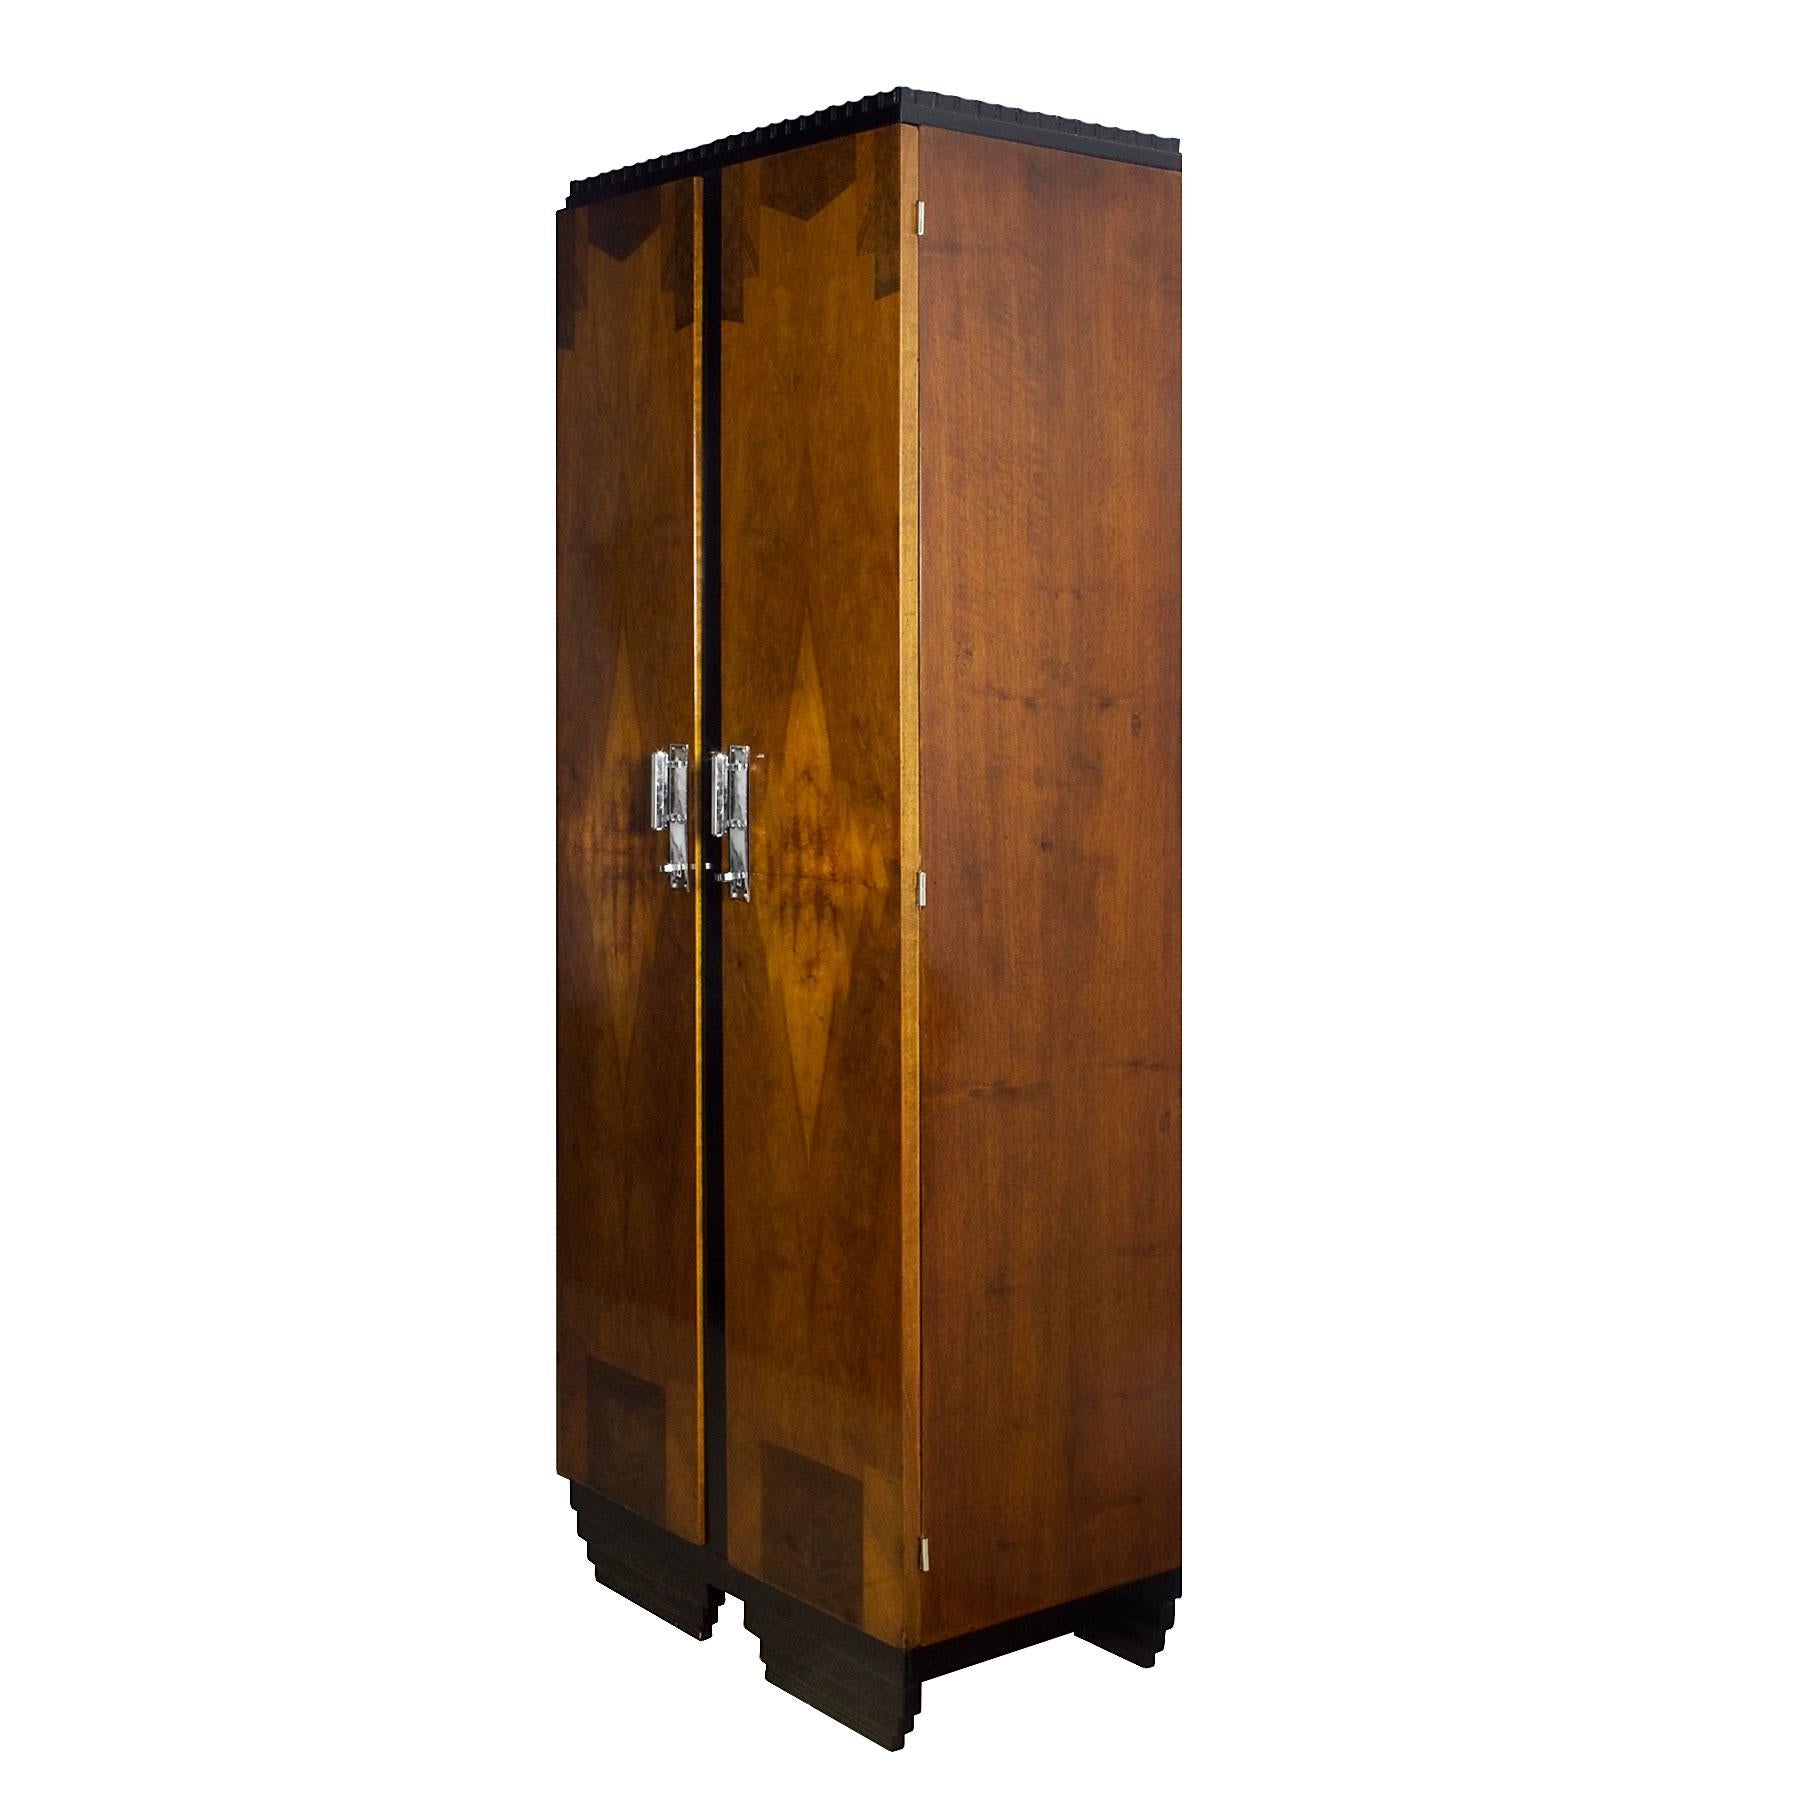 Nice wardrobe, two doors with walnut and walnut burl veneers, French polish. Black lacquered top, strut and base. Four shelves inside, chrome-plated brass hinges and handles.

France, circa 1940.